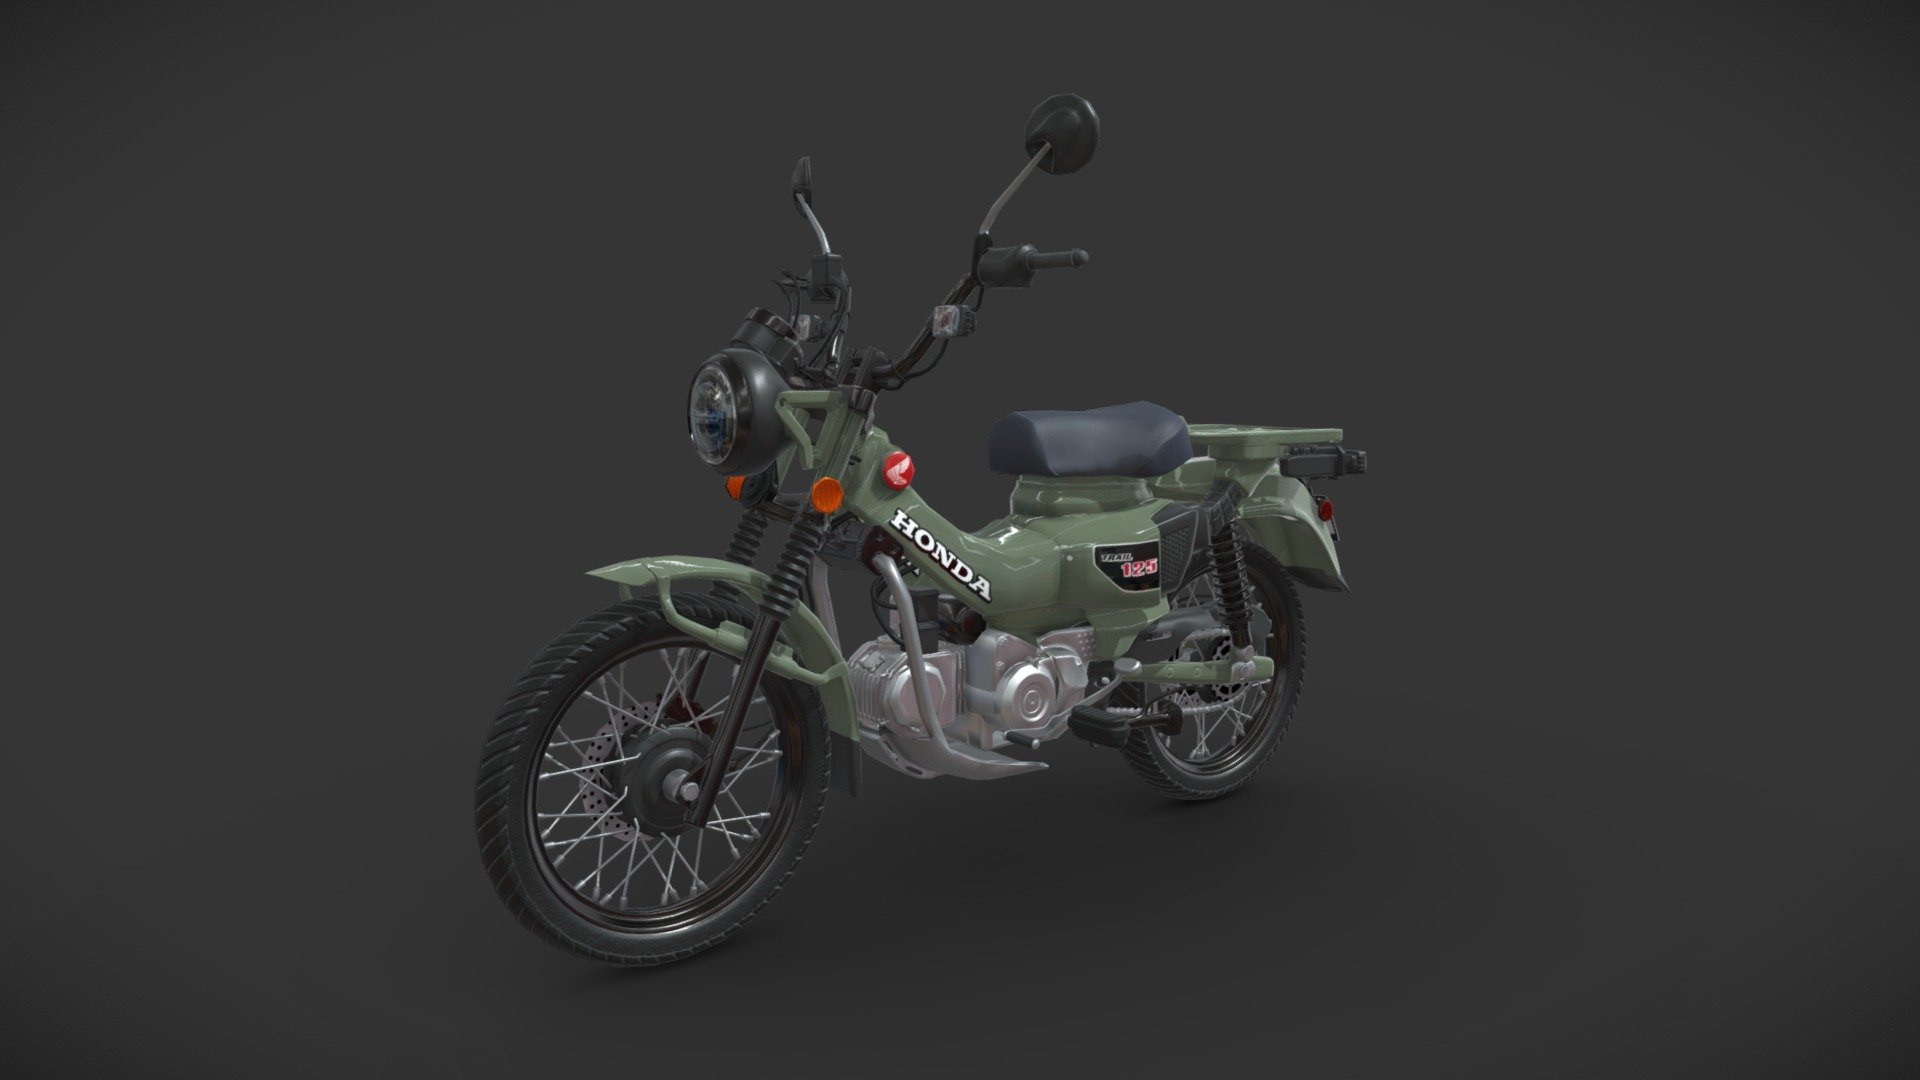 This is Honda Trail 125 ABS 3d Model.

This is in Pearl Organic Green Color of Honda Trail 125 ABS.

The model was created in Maya 2018, rendered with Substance painter, Clean topology based on quads. Detailed High quality model.

All Materials in this pack are provide with all named.

Model Type: Polygonal
Polygons: 41,336
Vertices: 43,488
Formats available: Maya ASCII 2018, Maya Binary 2018, FBX , OBJ
Textures: Color, Normal, Metallic, Roughness, Ambient Occlusion, Displacement and Alpha
Texture Resolution: 4096 x 4096 pixels

If the price is not suitable for you can contact me and discuss the price.

Please don't forget to rate the model.

Hope you like it!

Thank You 3d model